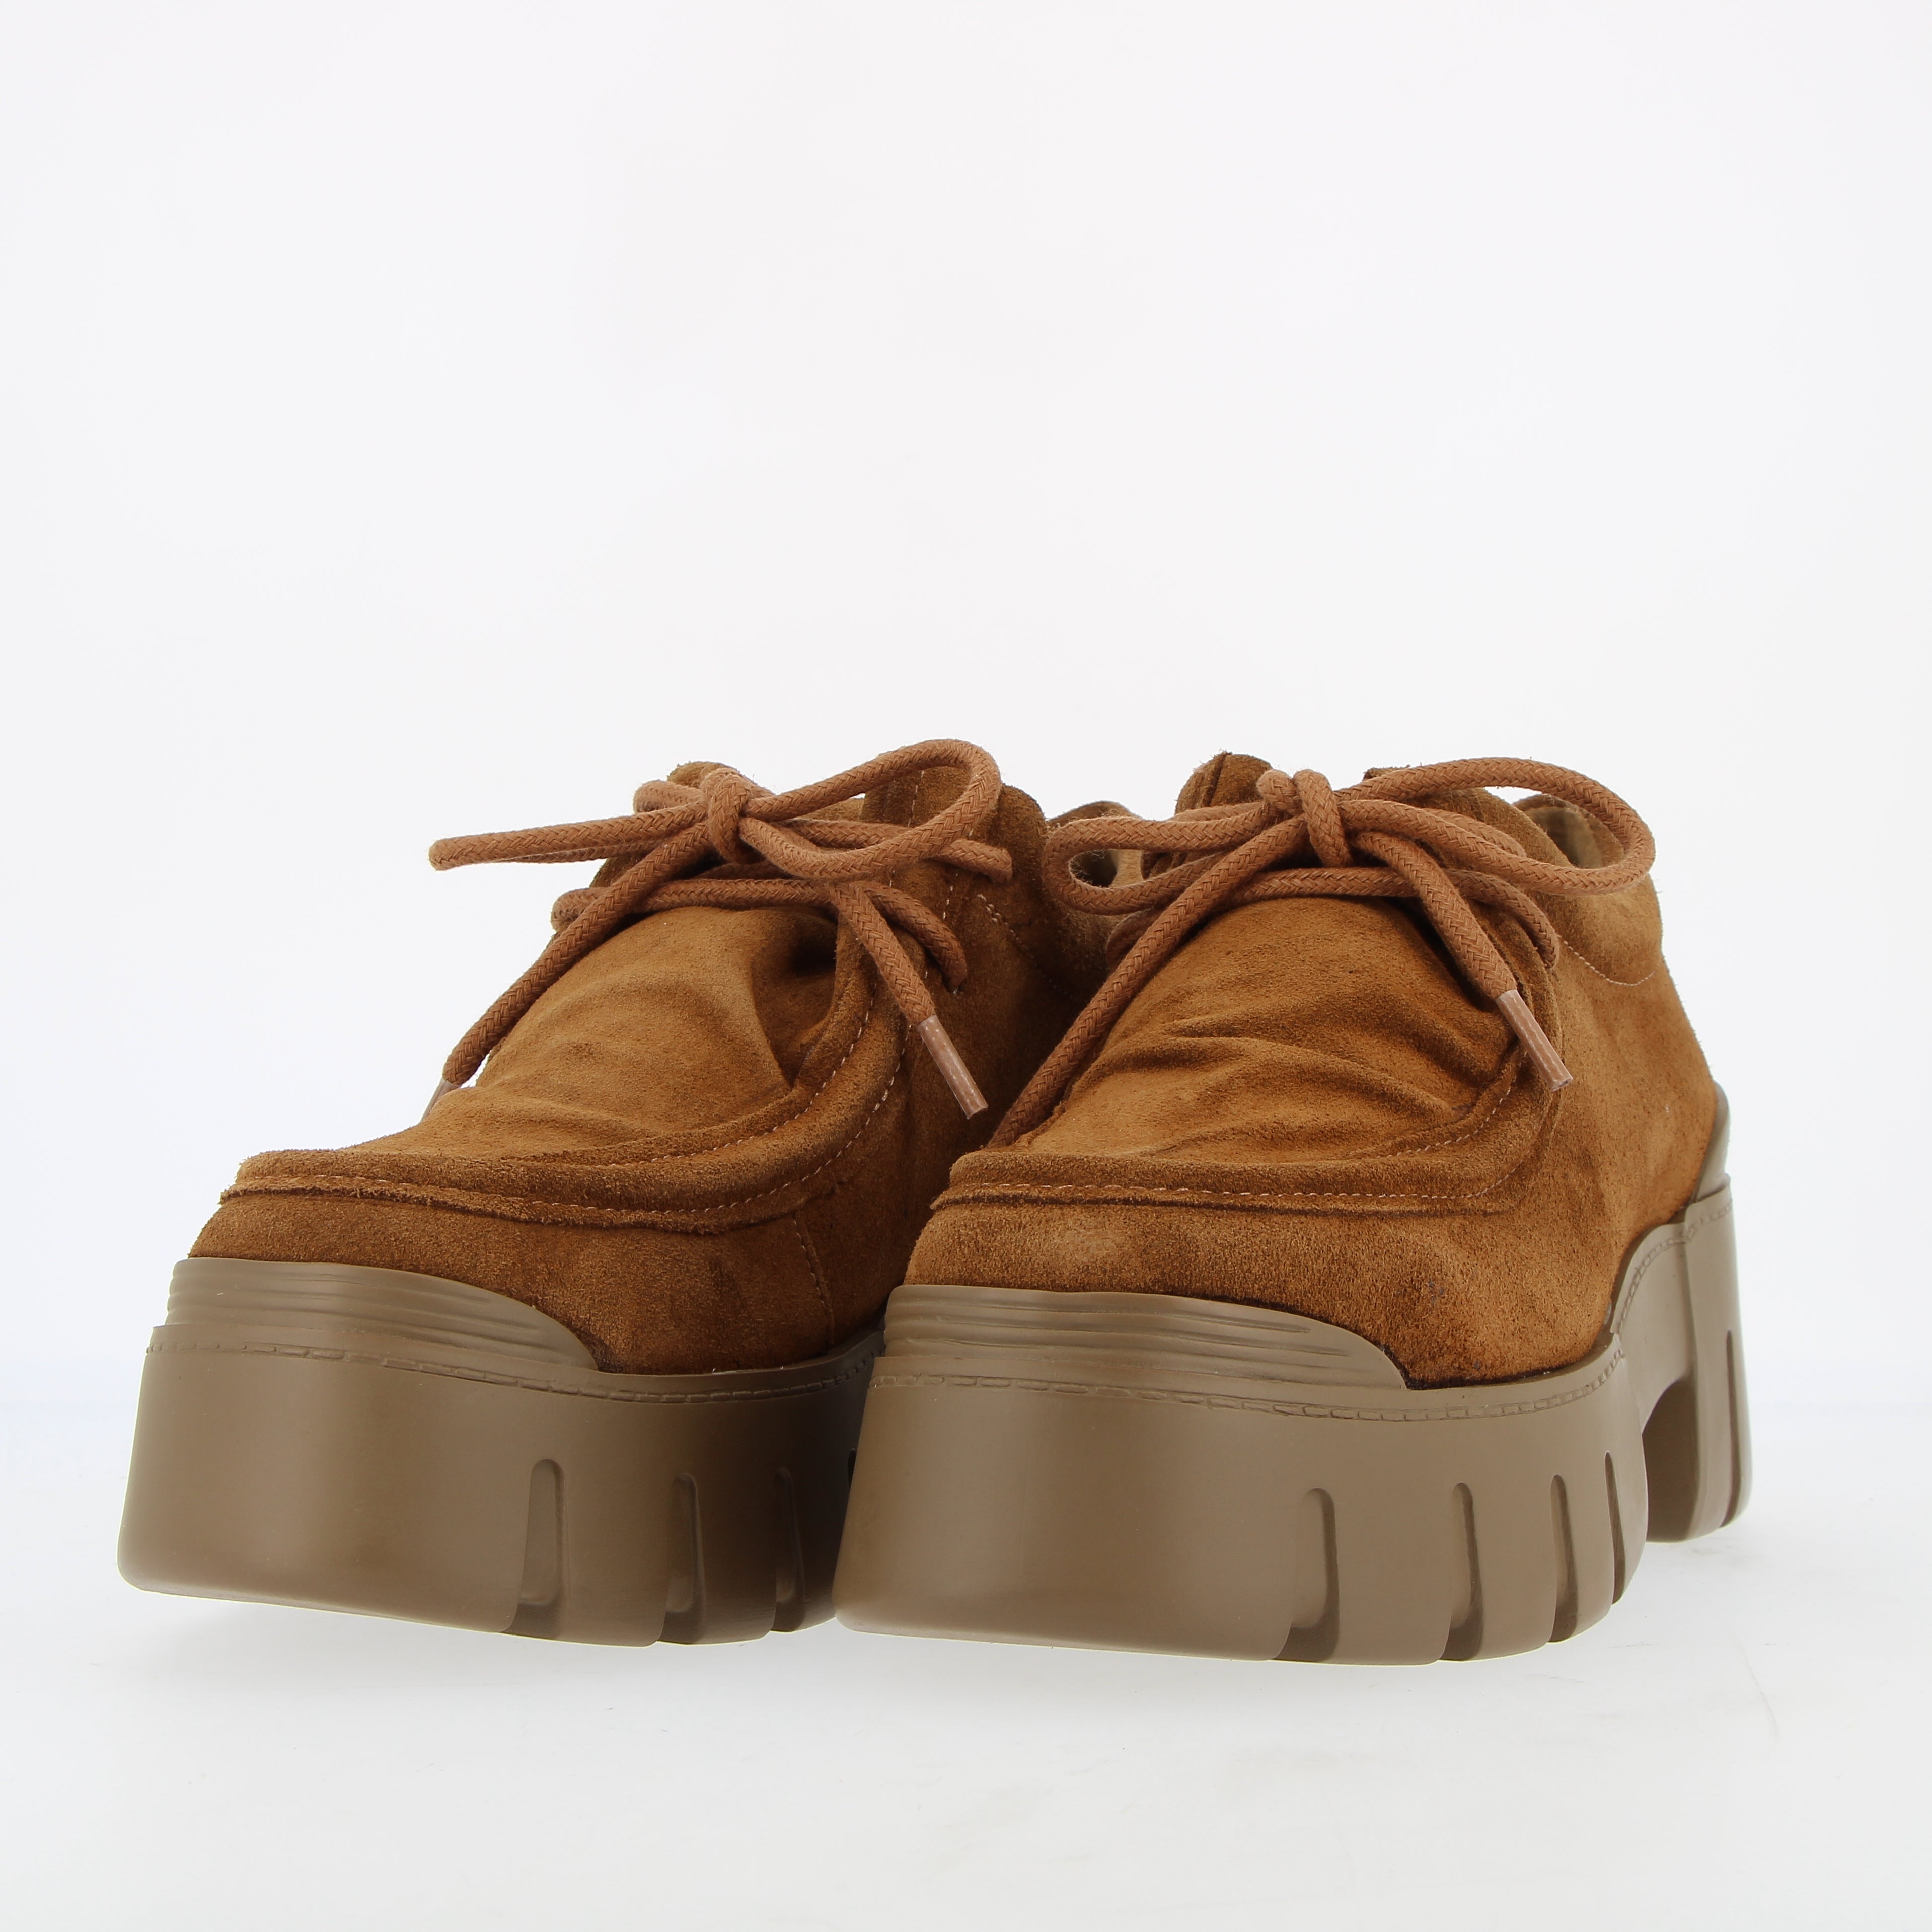 Lace-up moccasin in cognac suede with rubber sole